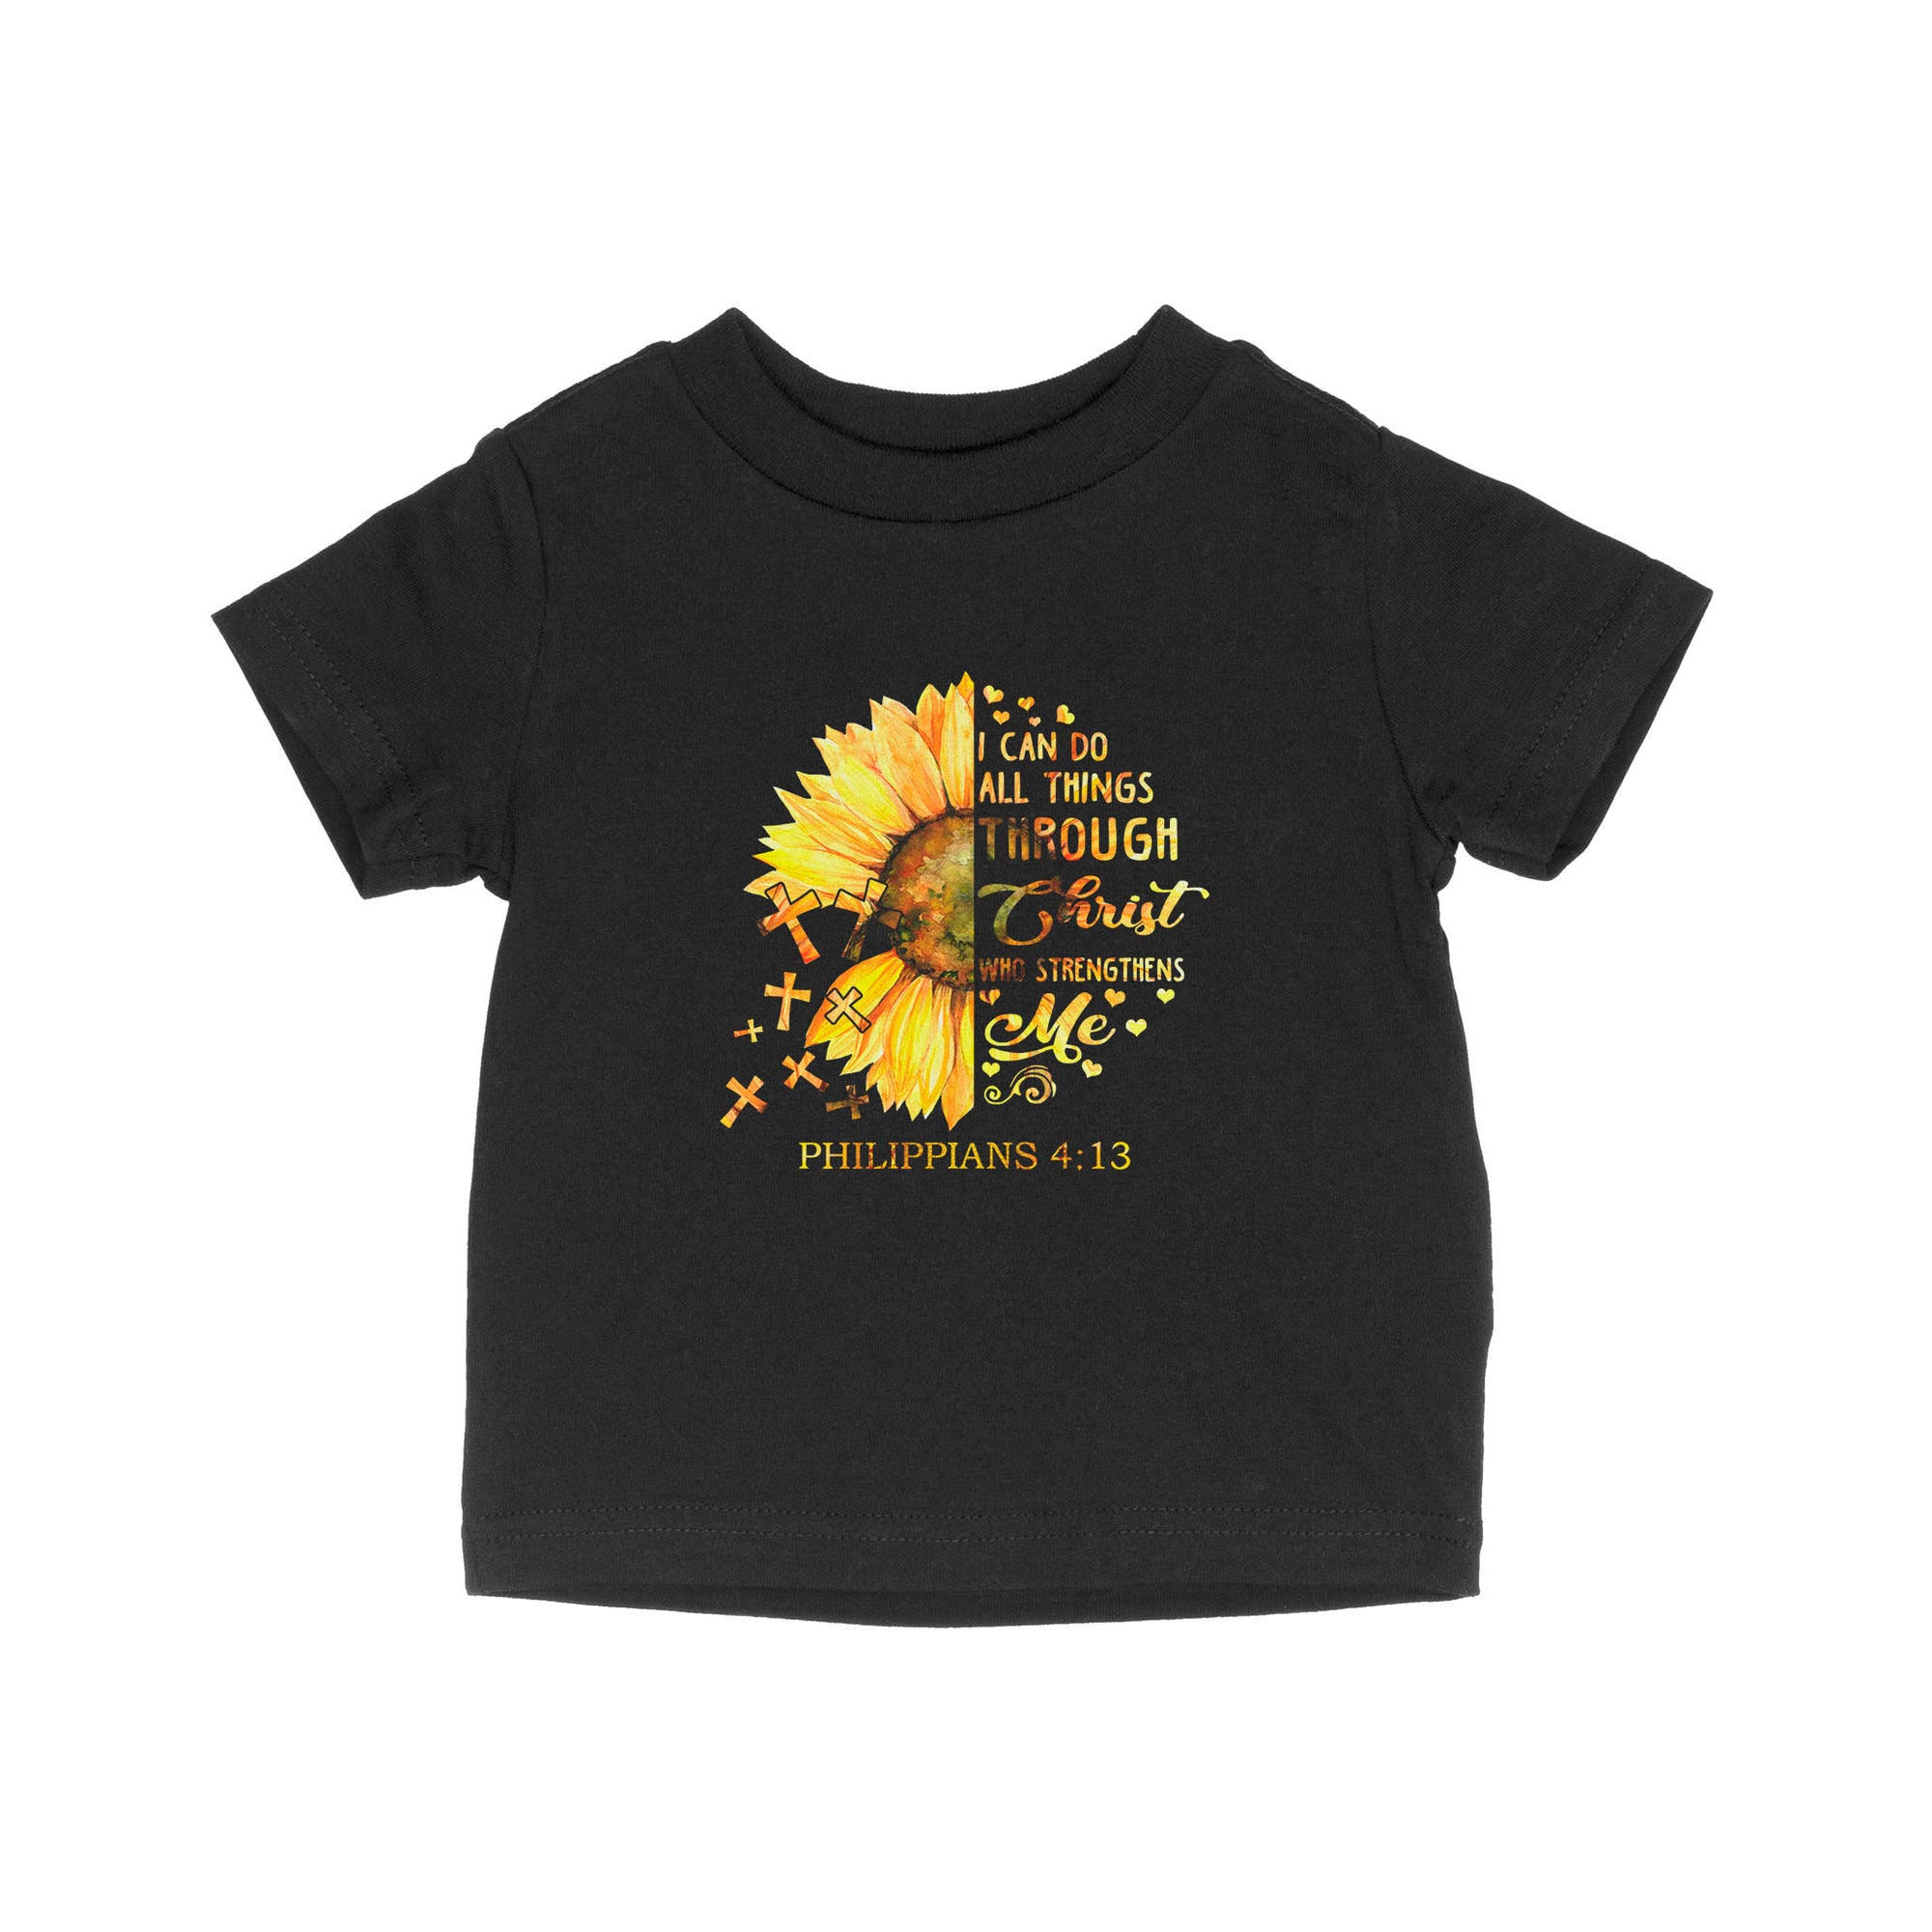 I Can Do All Things Through Christ Who Strengthens Me Daisy Flower - Baby T-Shirt